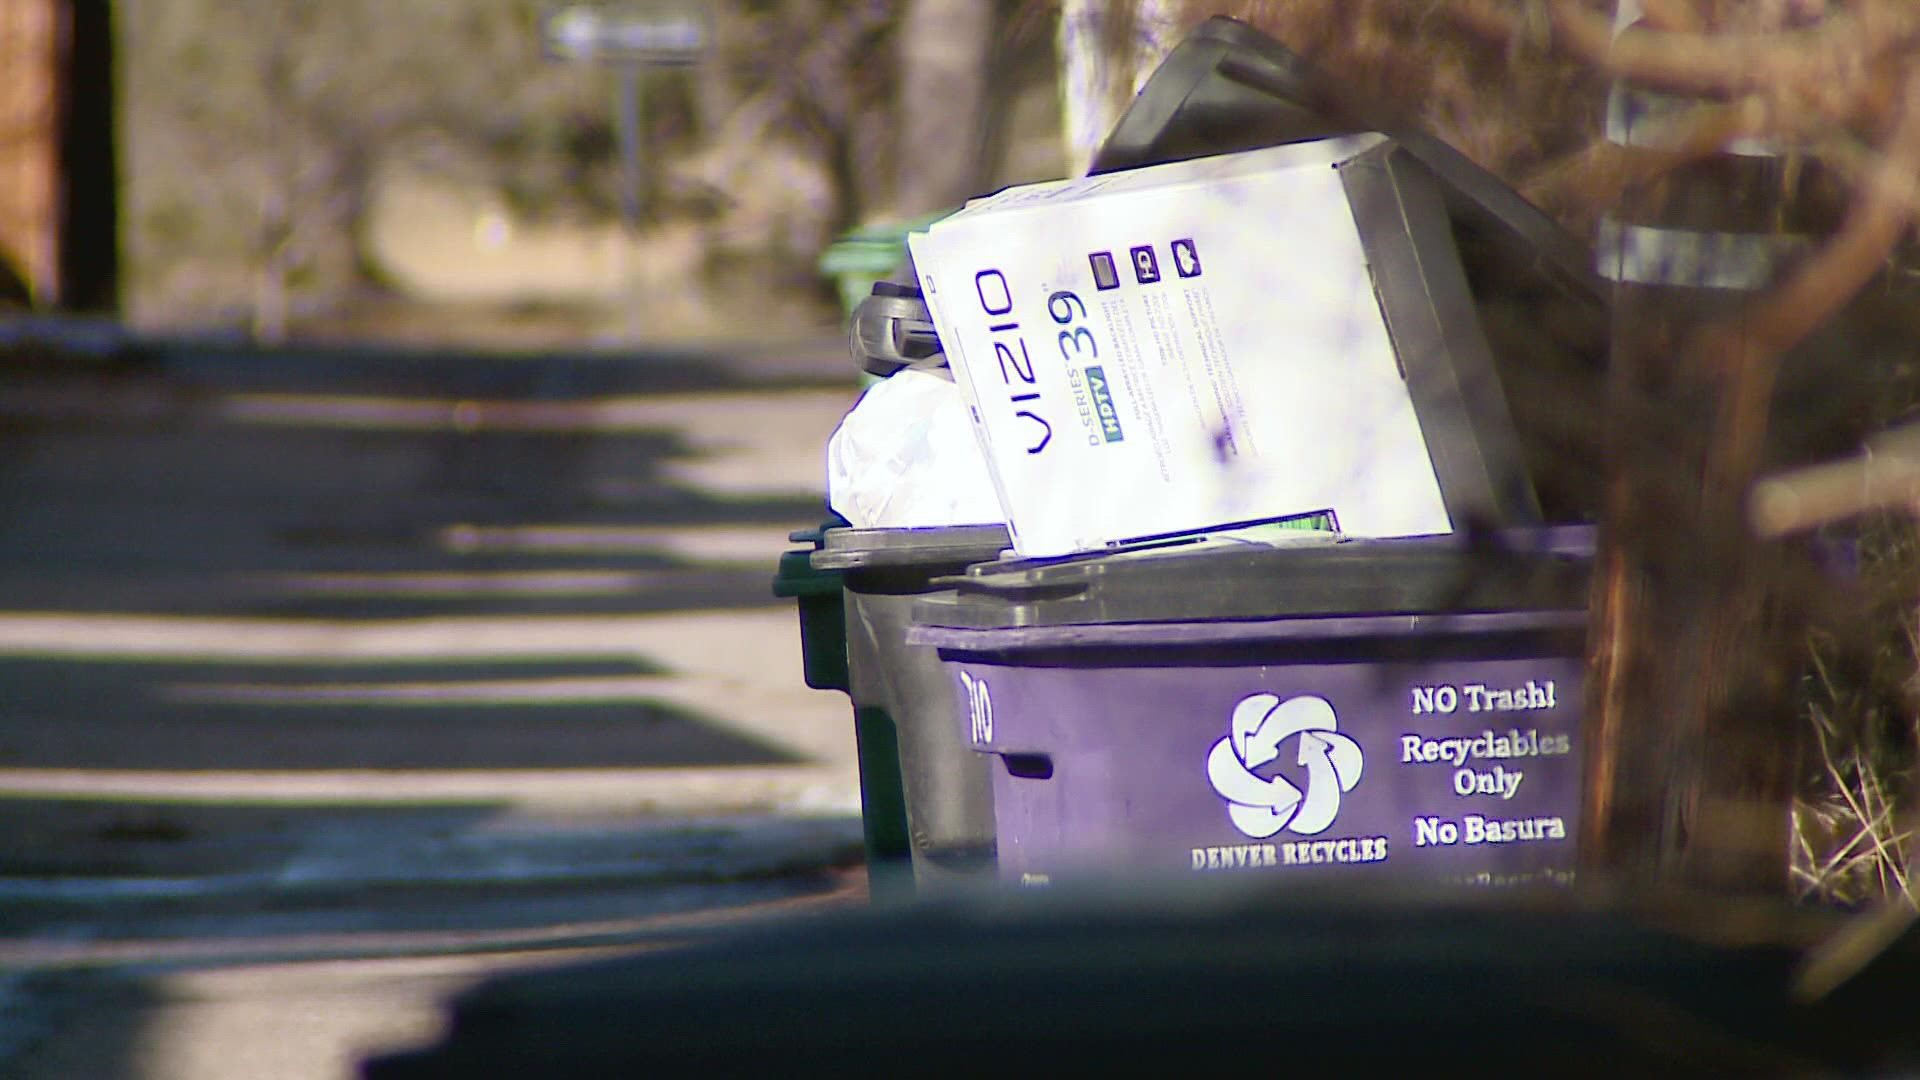 The goal of the potential changes is to get people to recycle and compost more.